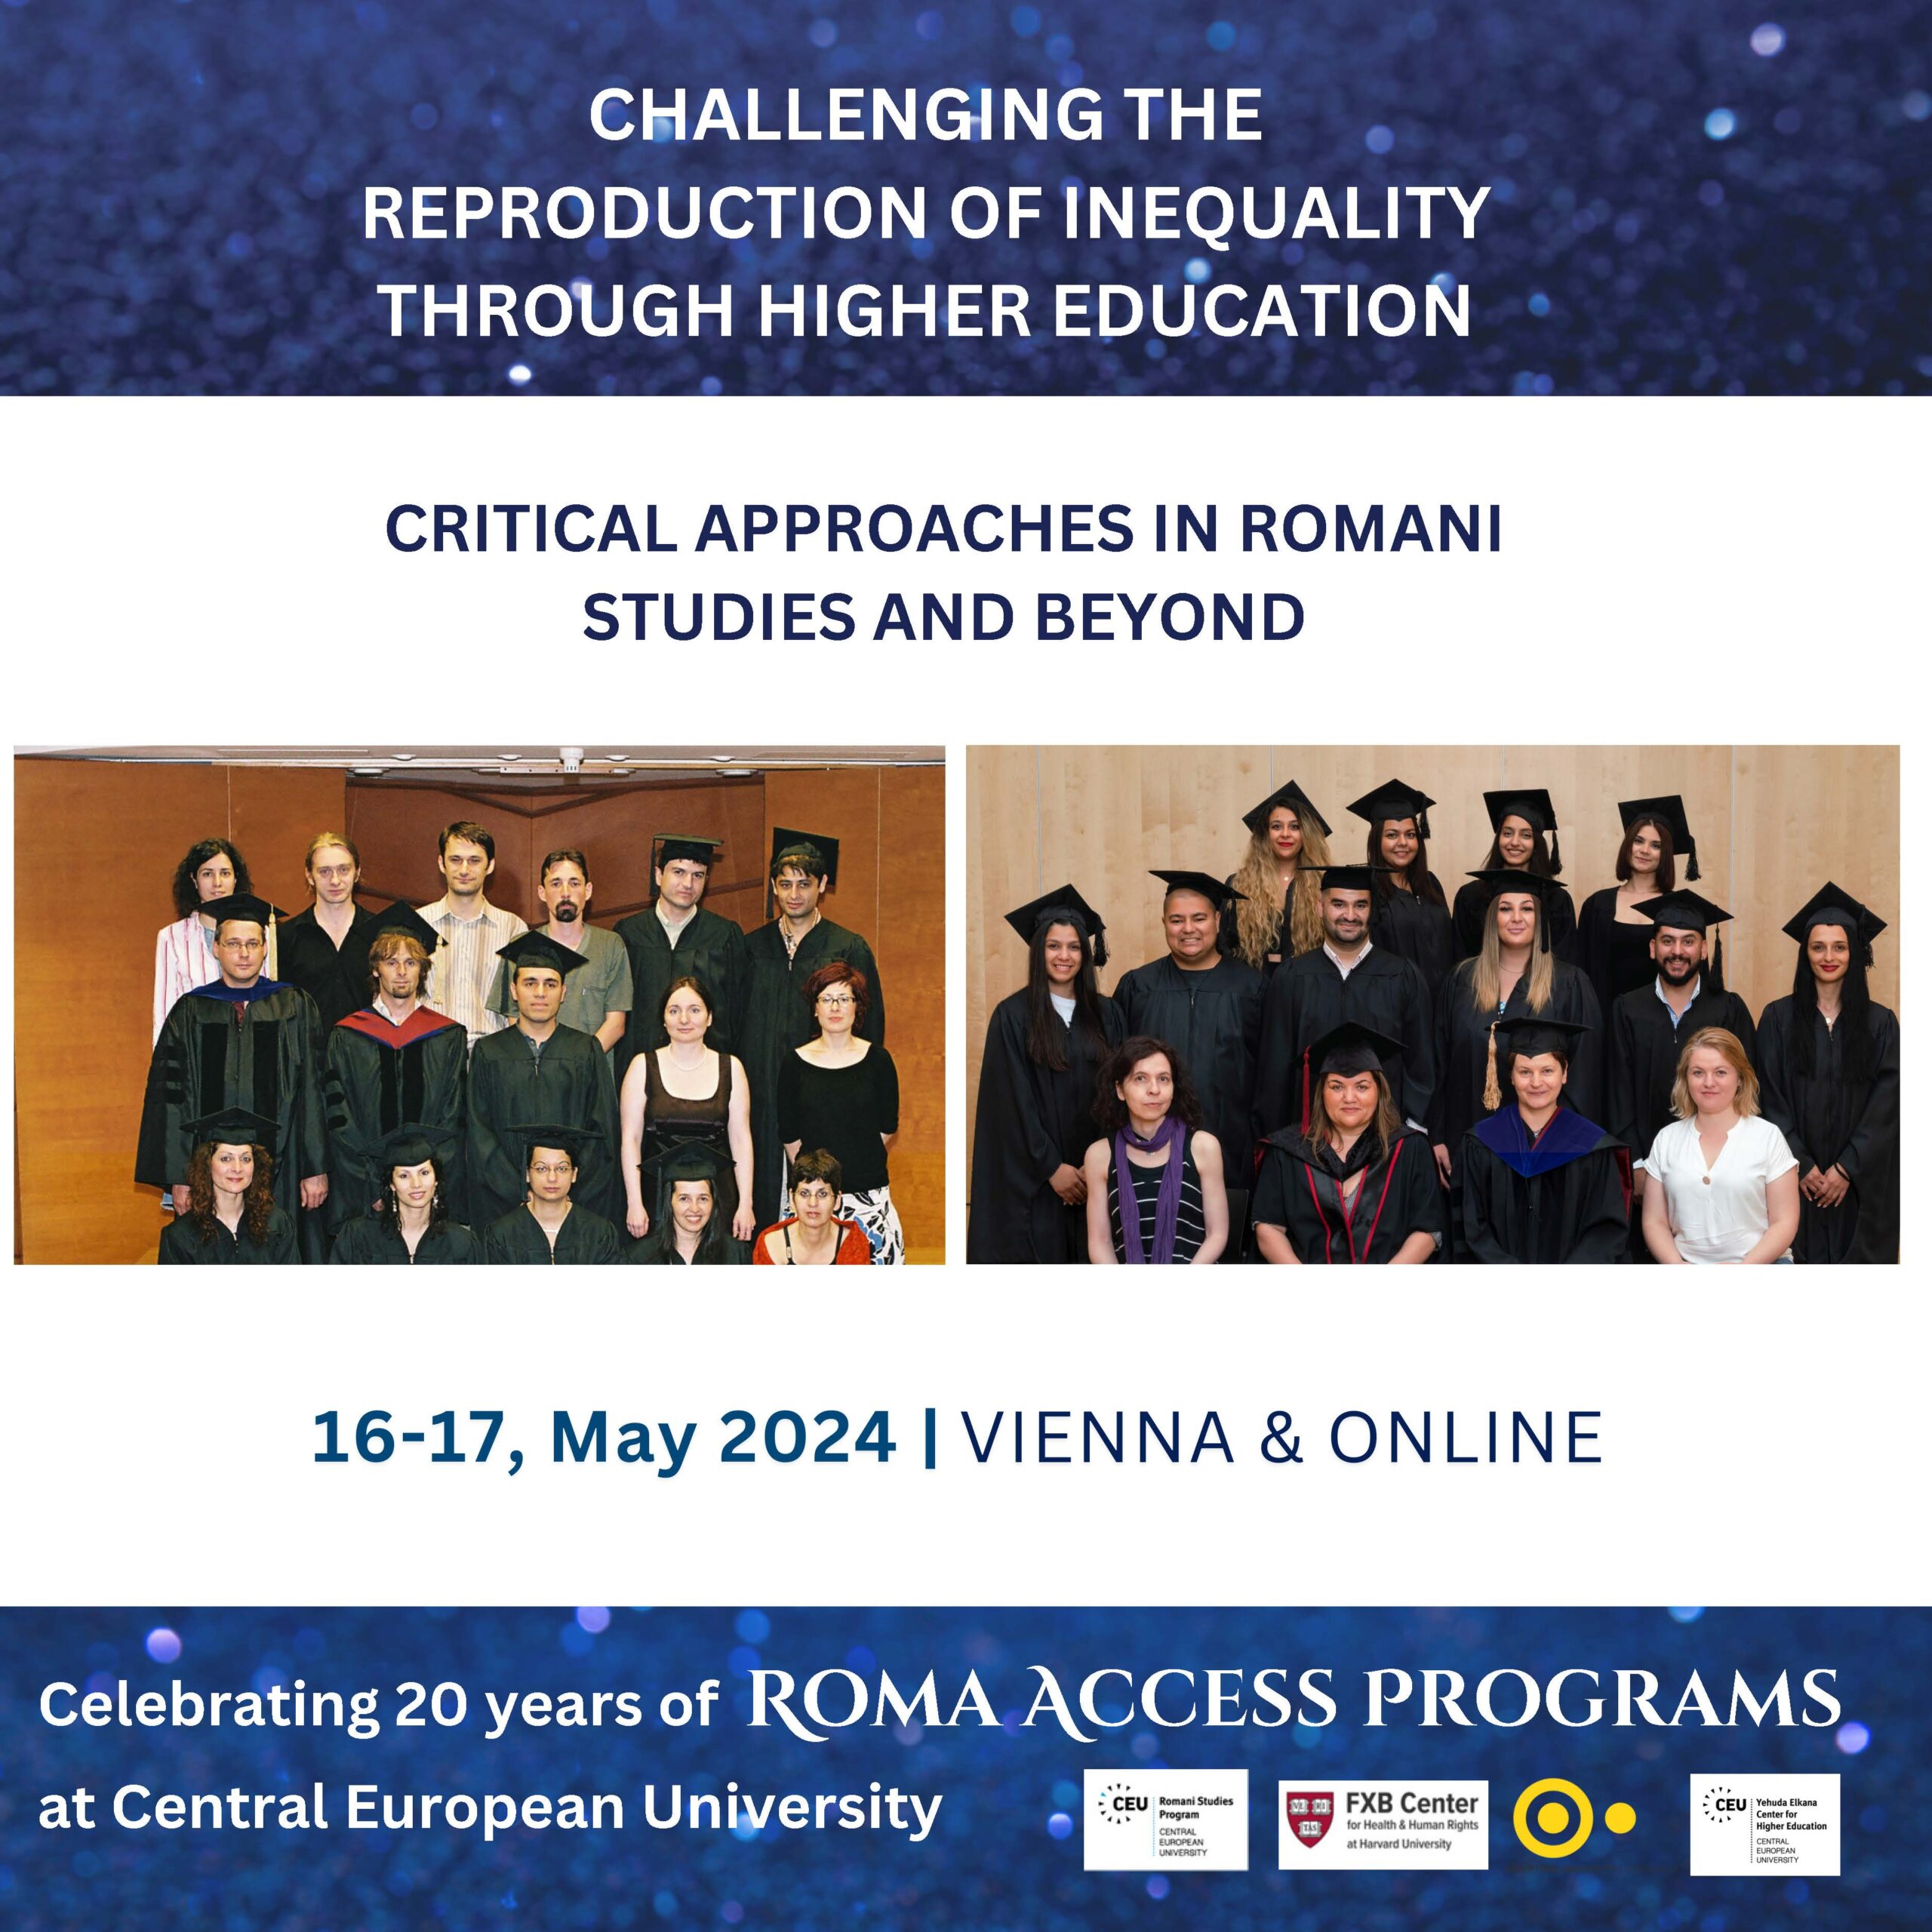 Challenging the Reproduction of Inequality Through Higher Education: Critical Approaches in Romani Studies and Beyond Flier. May 16-17, 2024, Vienna and online